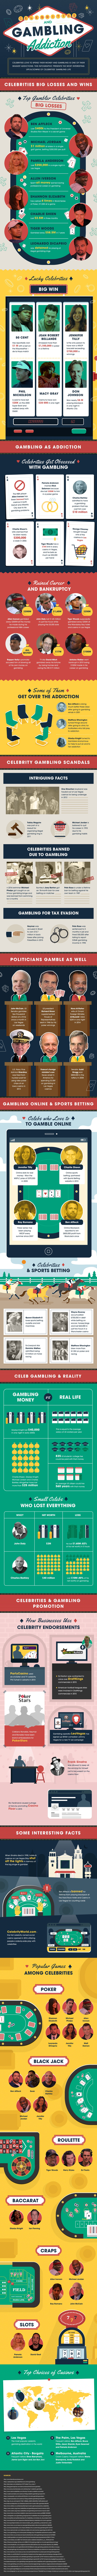 celebrities and gambling infographic